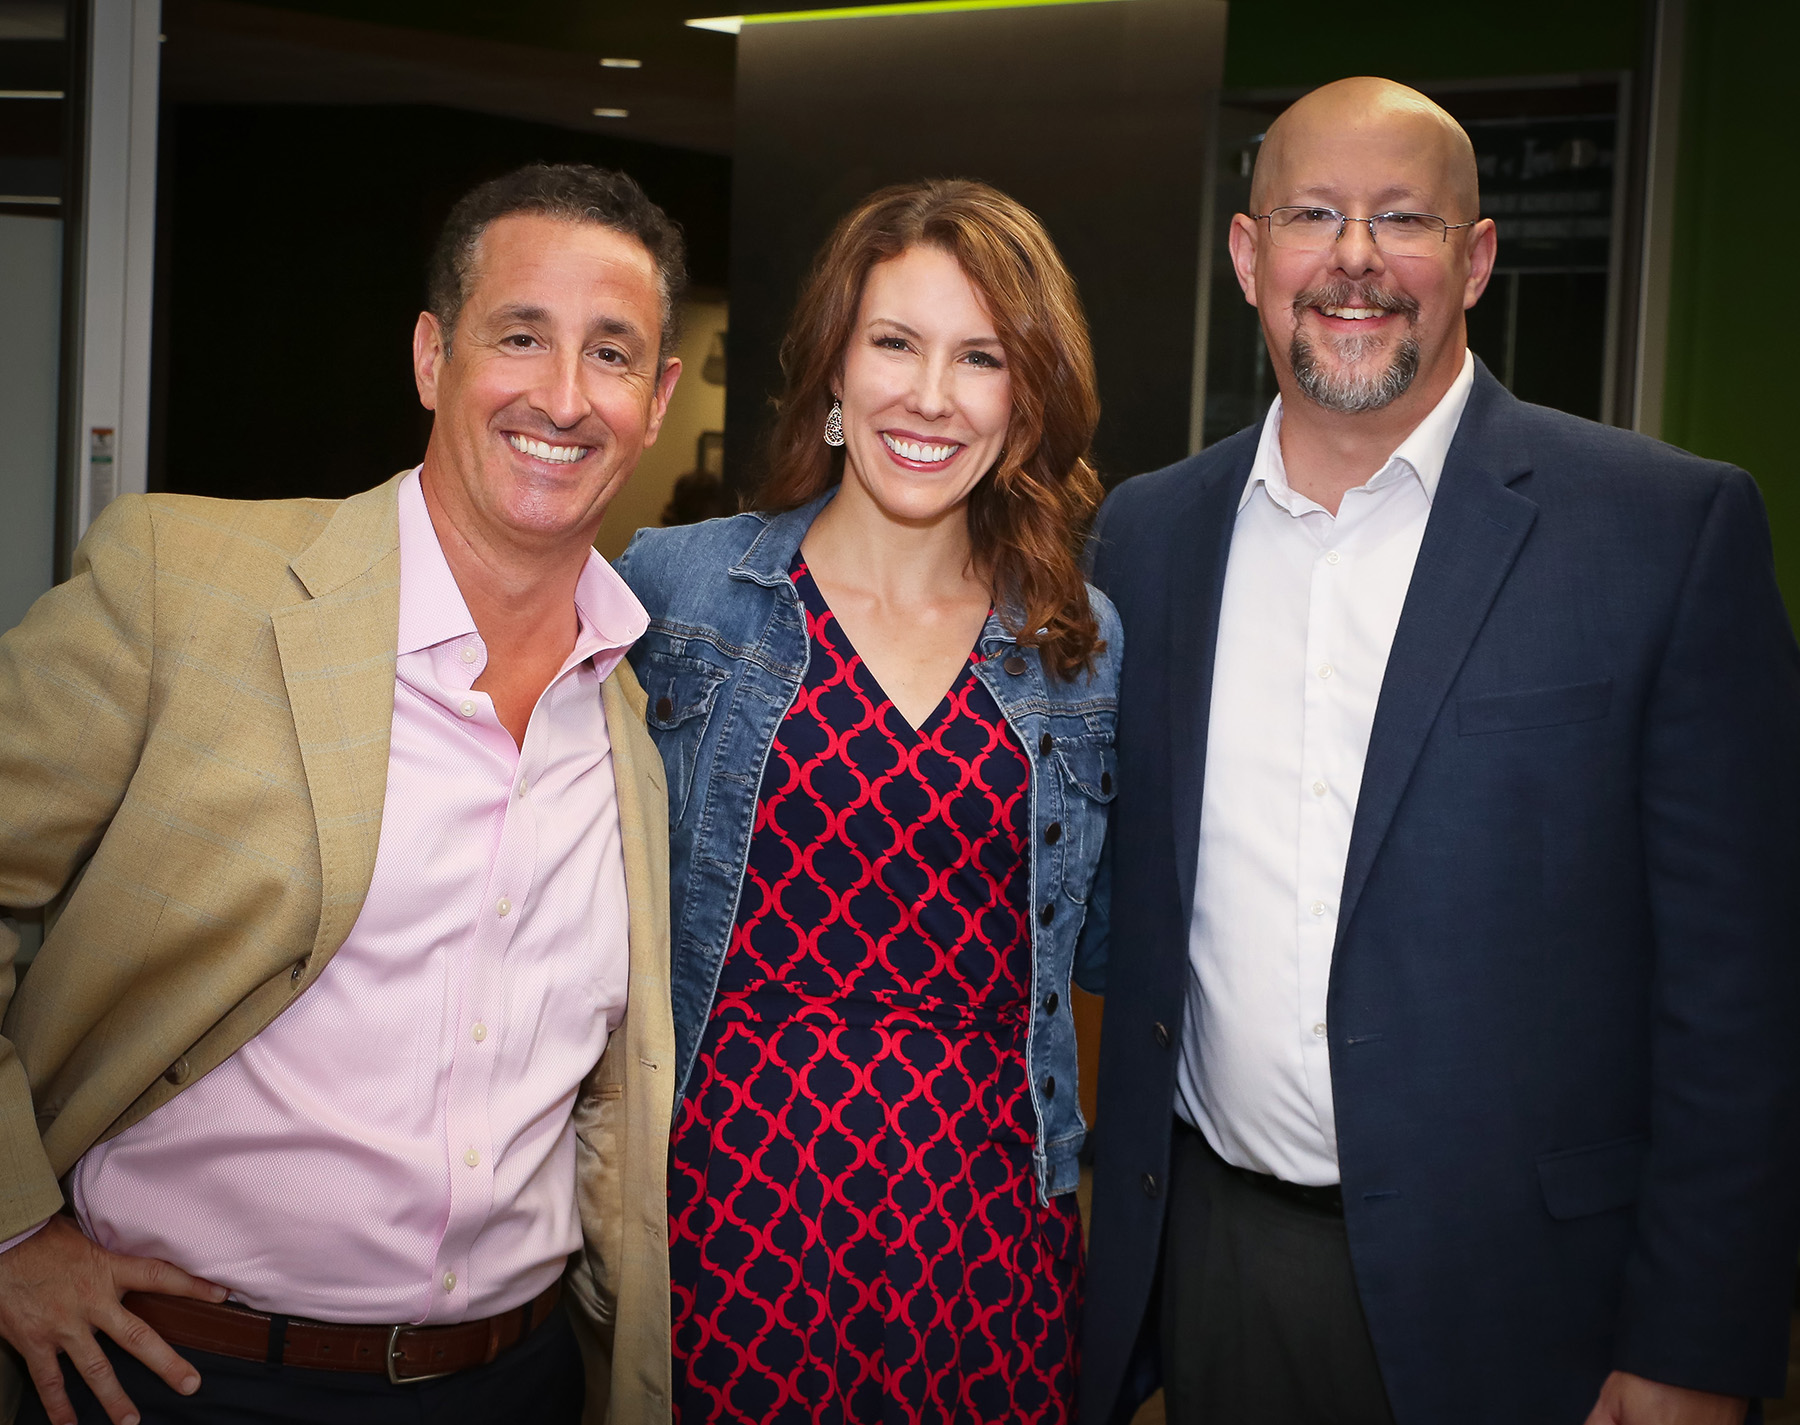 Stephen with Misty Lown and David Mammano, host of the Avanti Entrepreneur podcast which Predictive ROI is honored to produce.